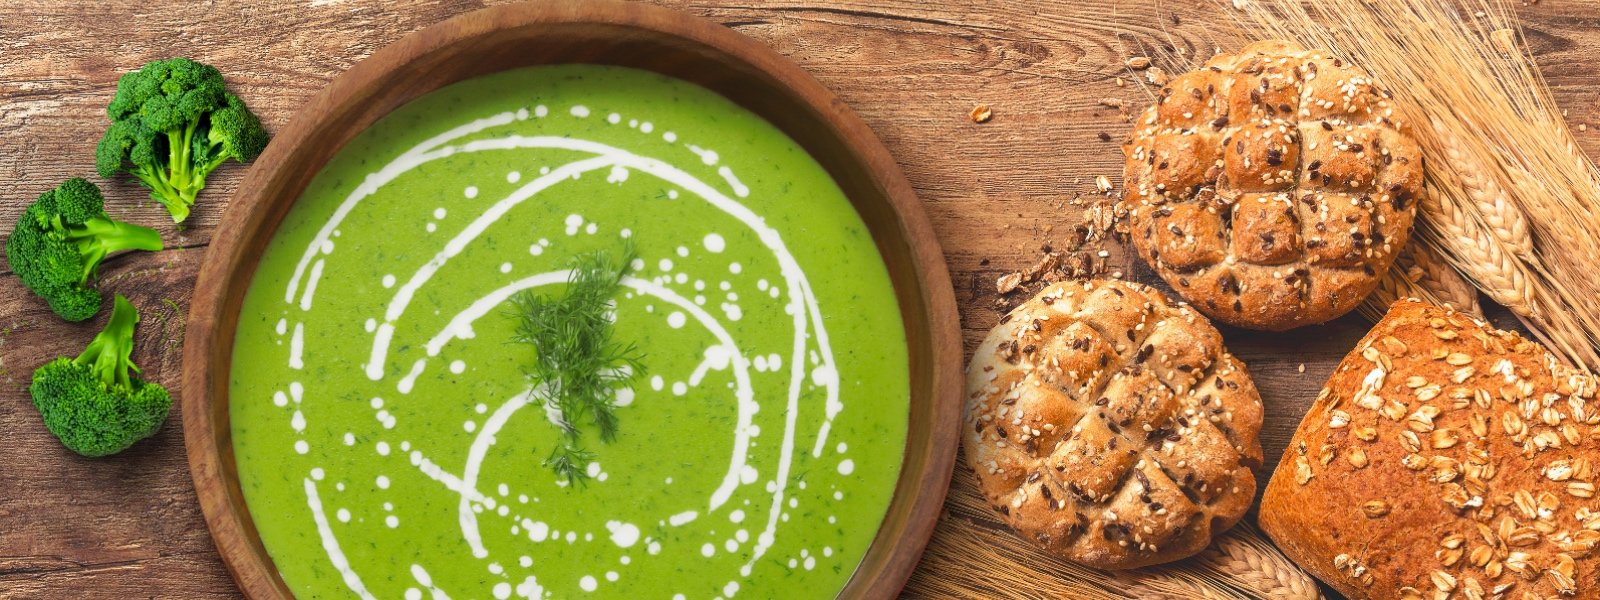 Broccoli And Spinach Soup